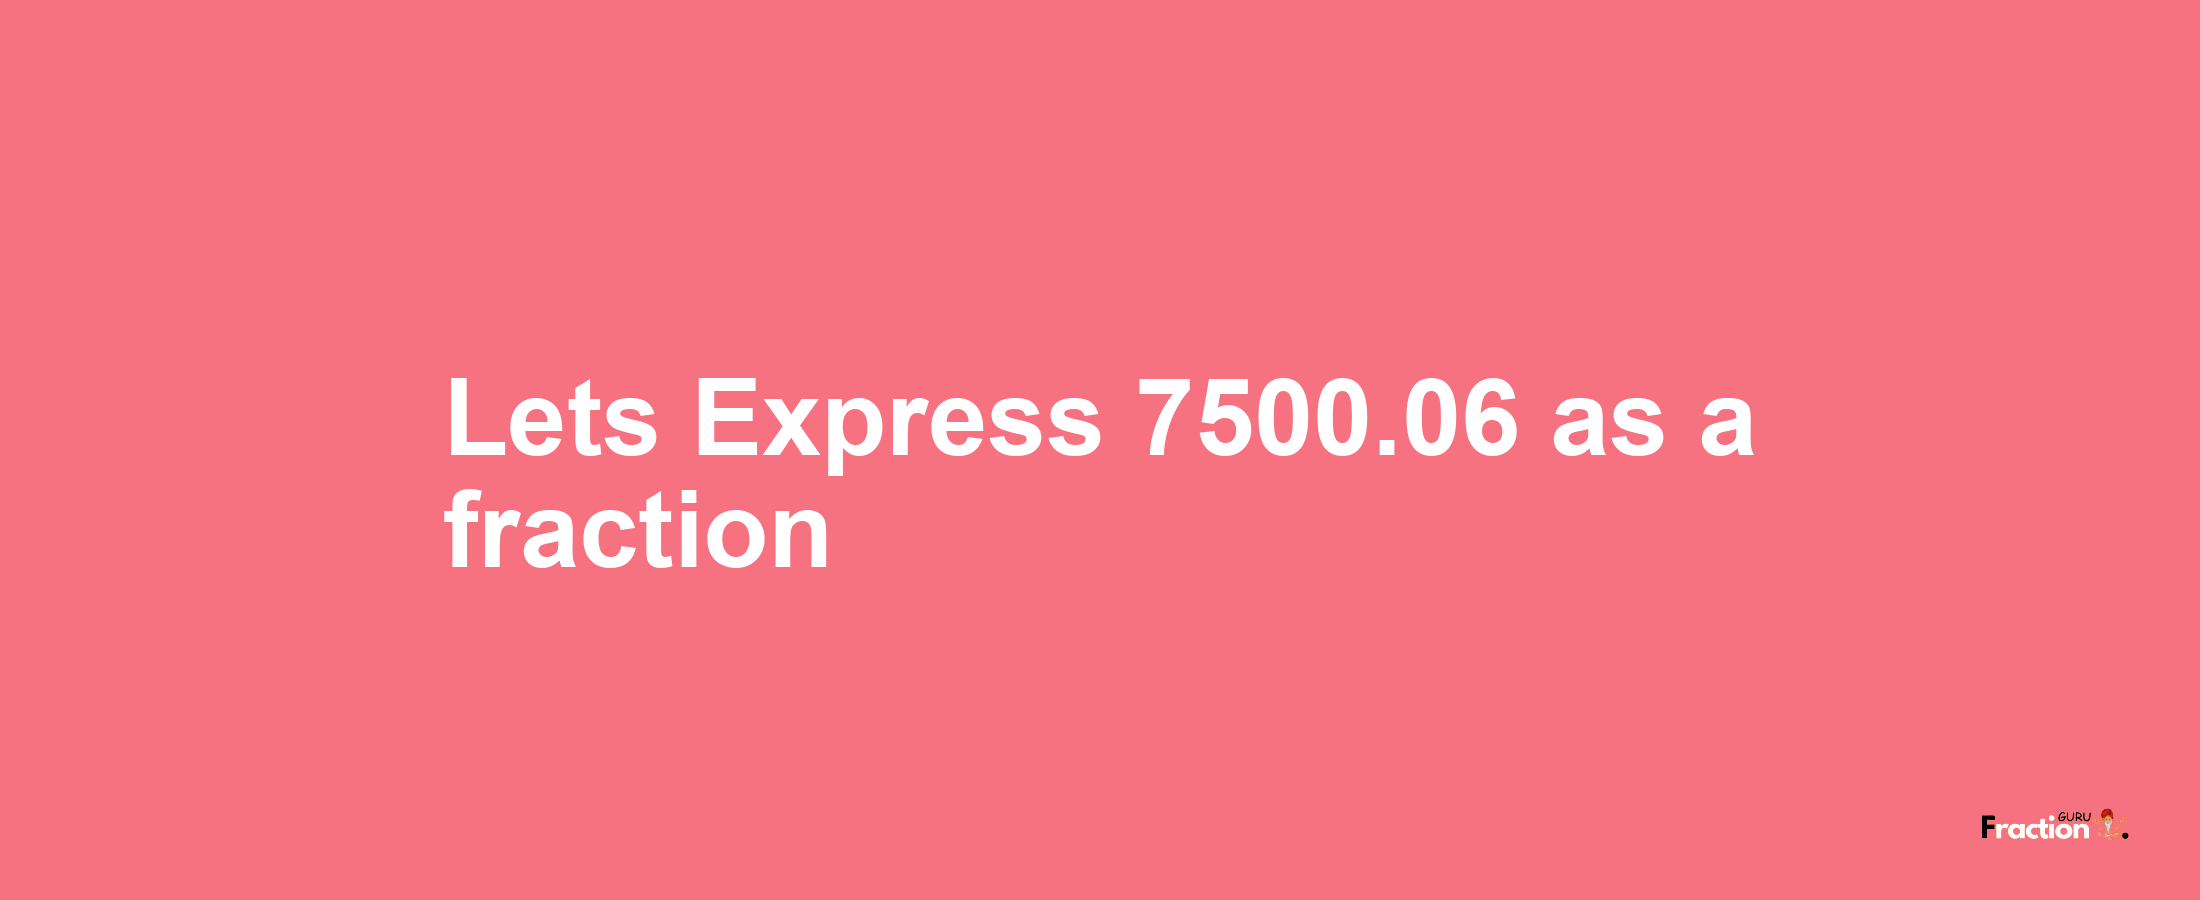 Lets Express 7500.06 as afraction